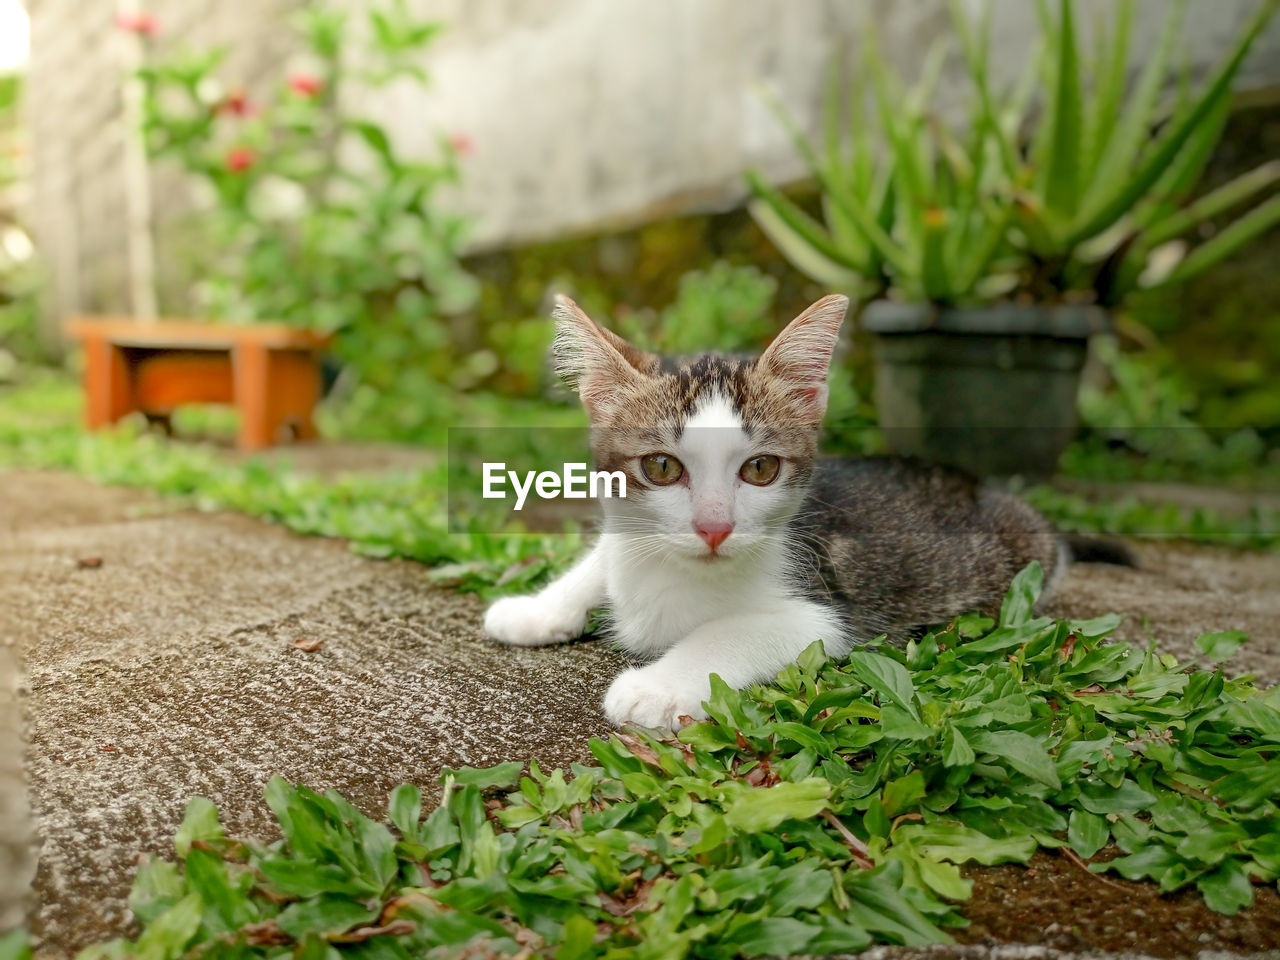 Portrait of a cat on plant in yard